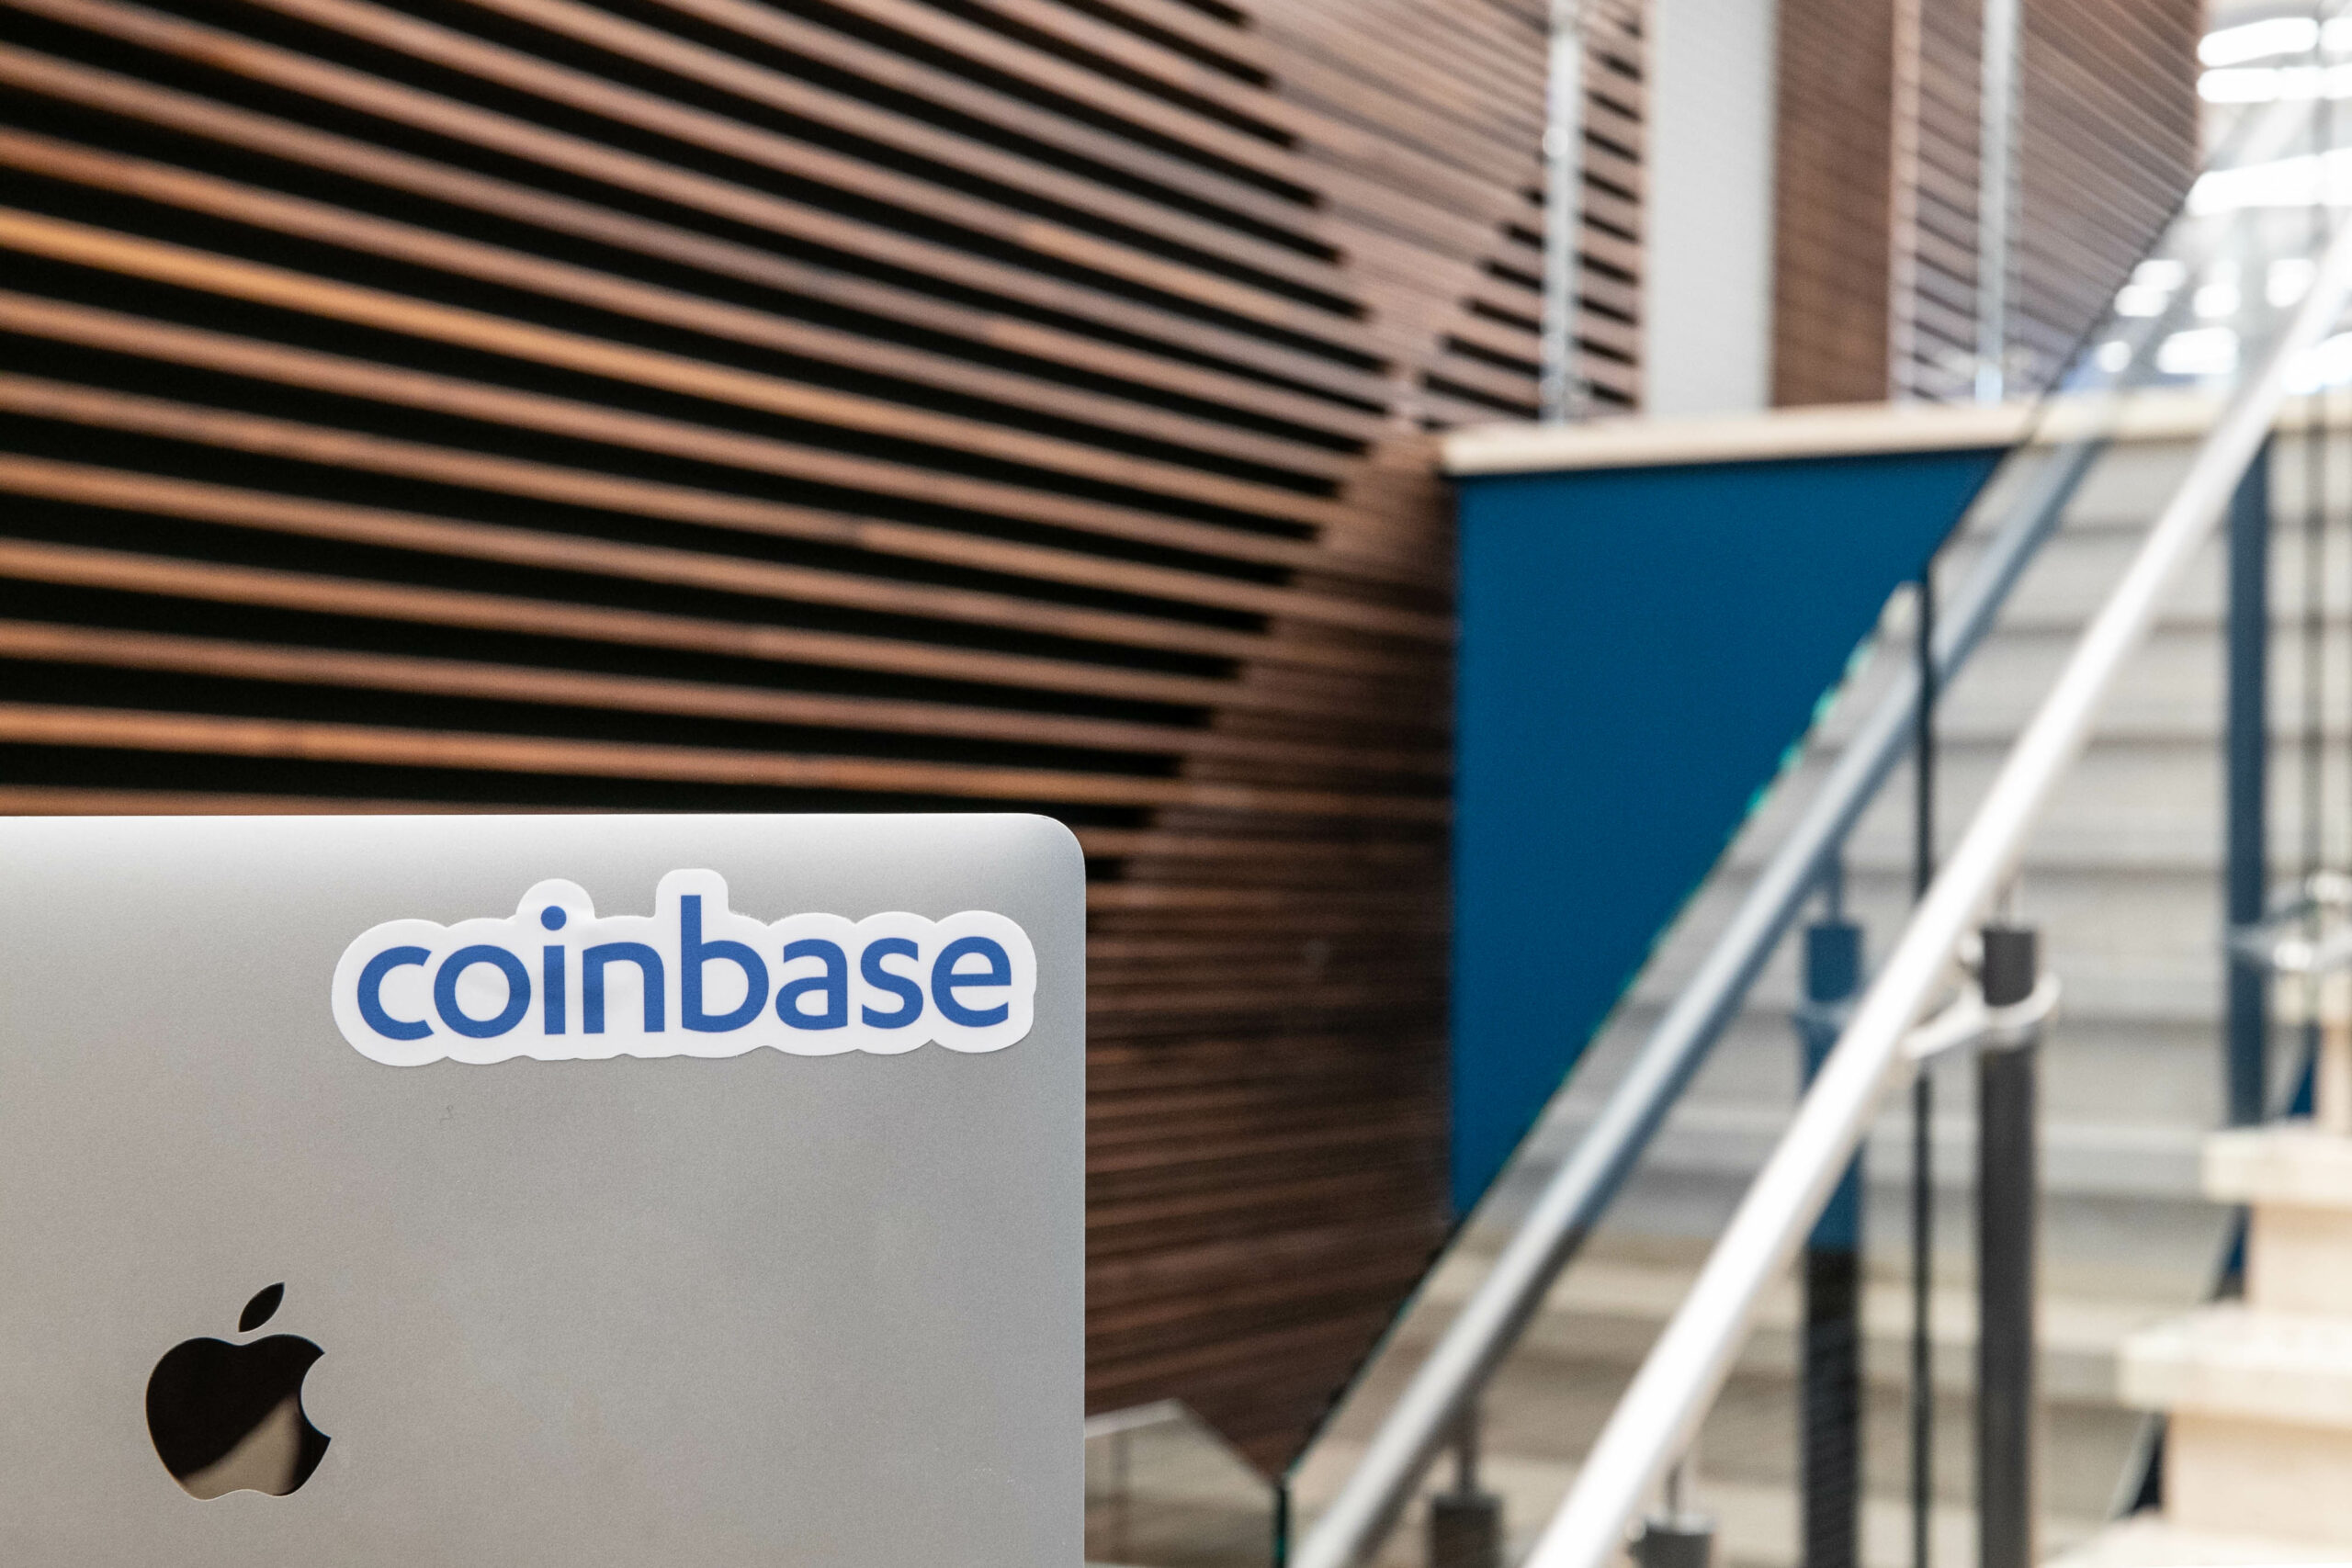 Coinbase Launches Next-Generation Smart Wallets to Simplify On-Chain Participation